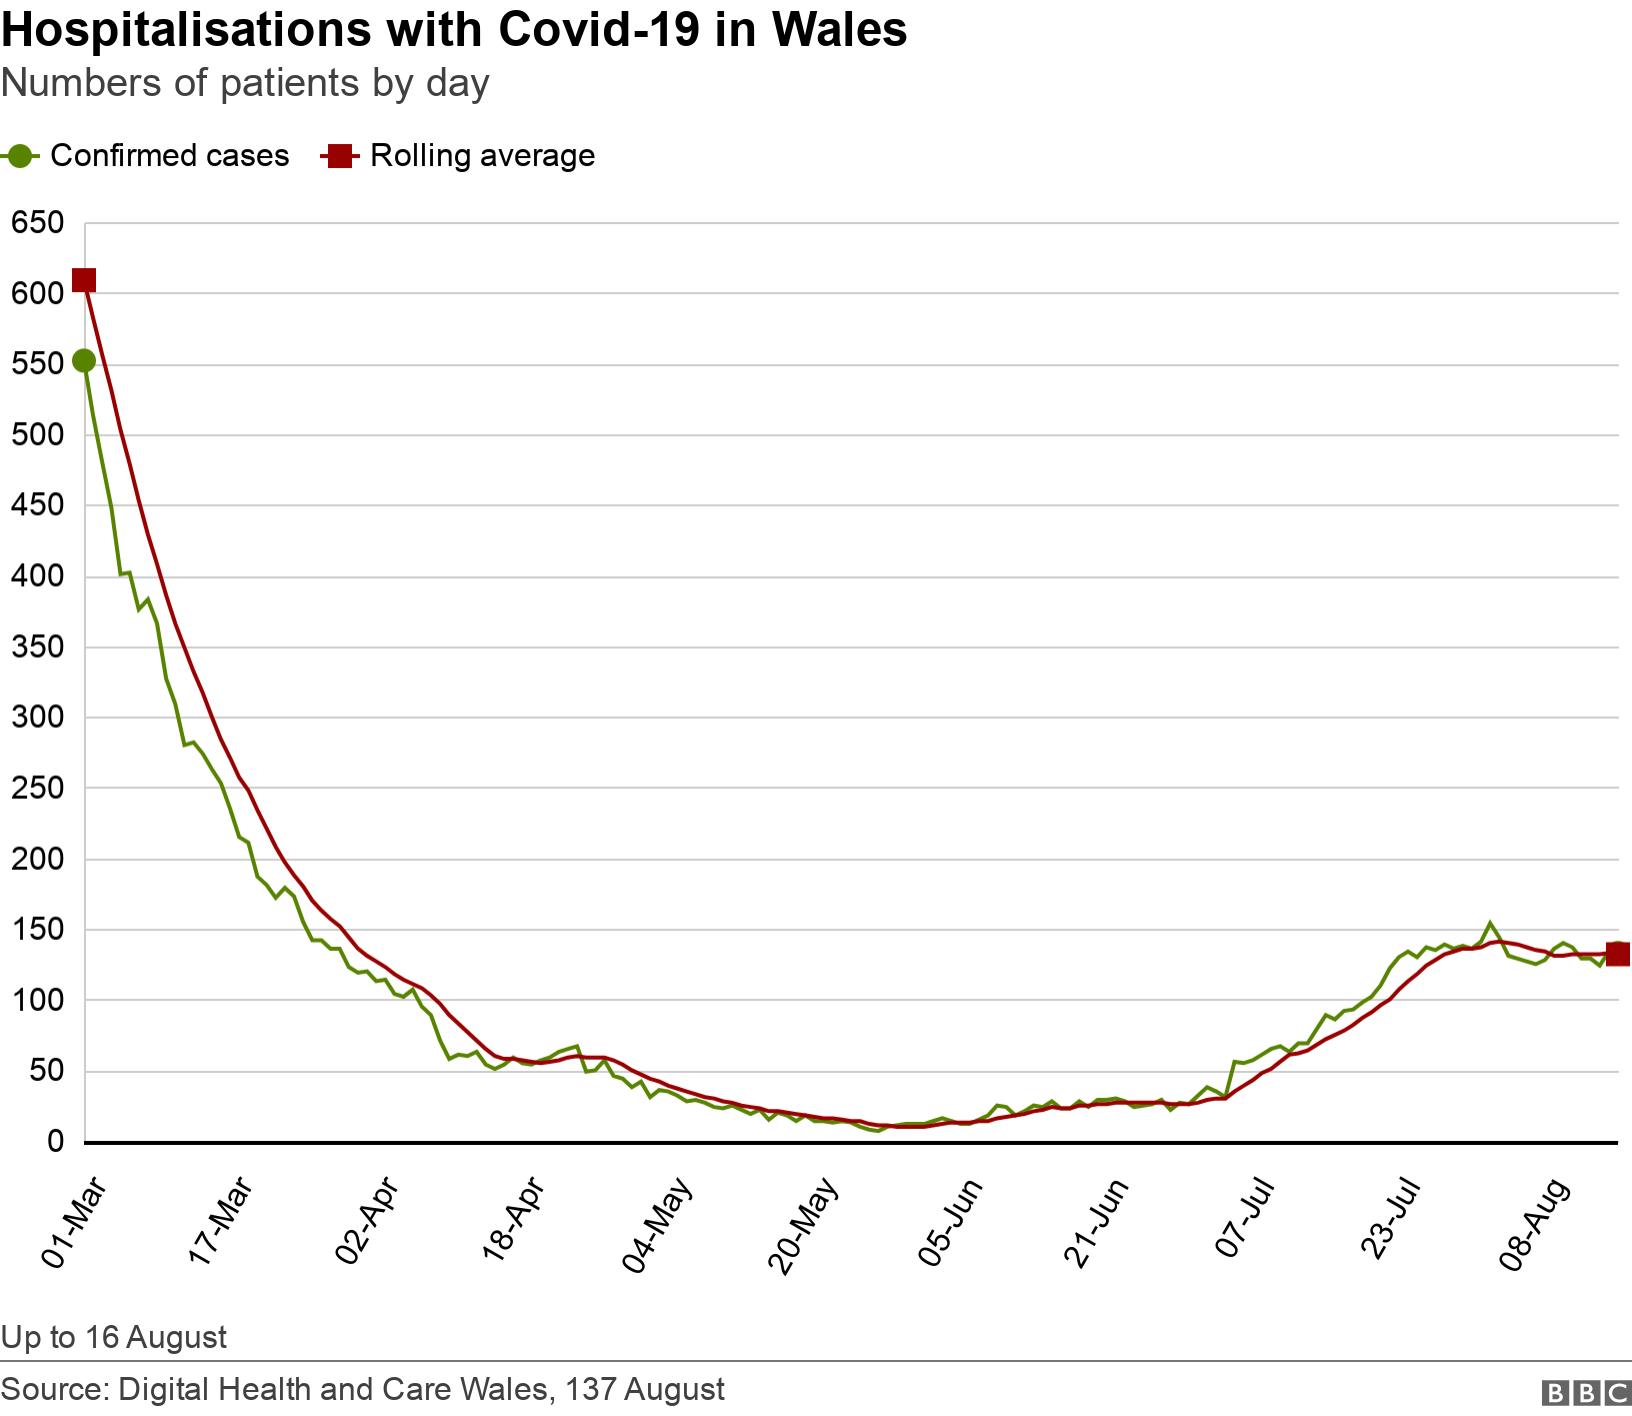 Hospitalisations with Covid-19 in Wales. Numbers of patients by day.  Up to 16 August.